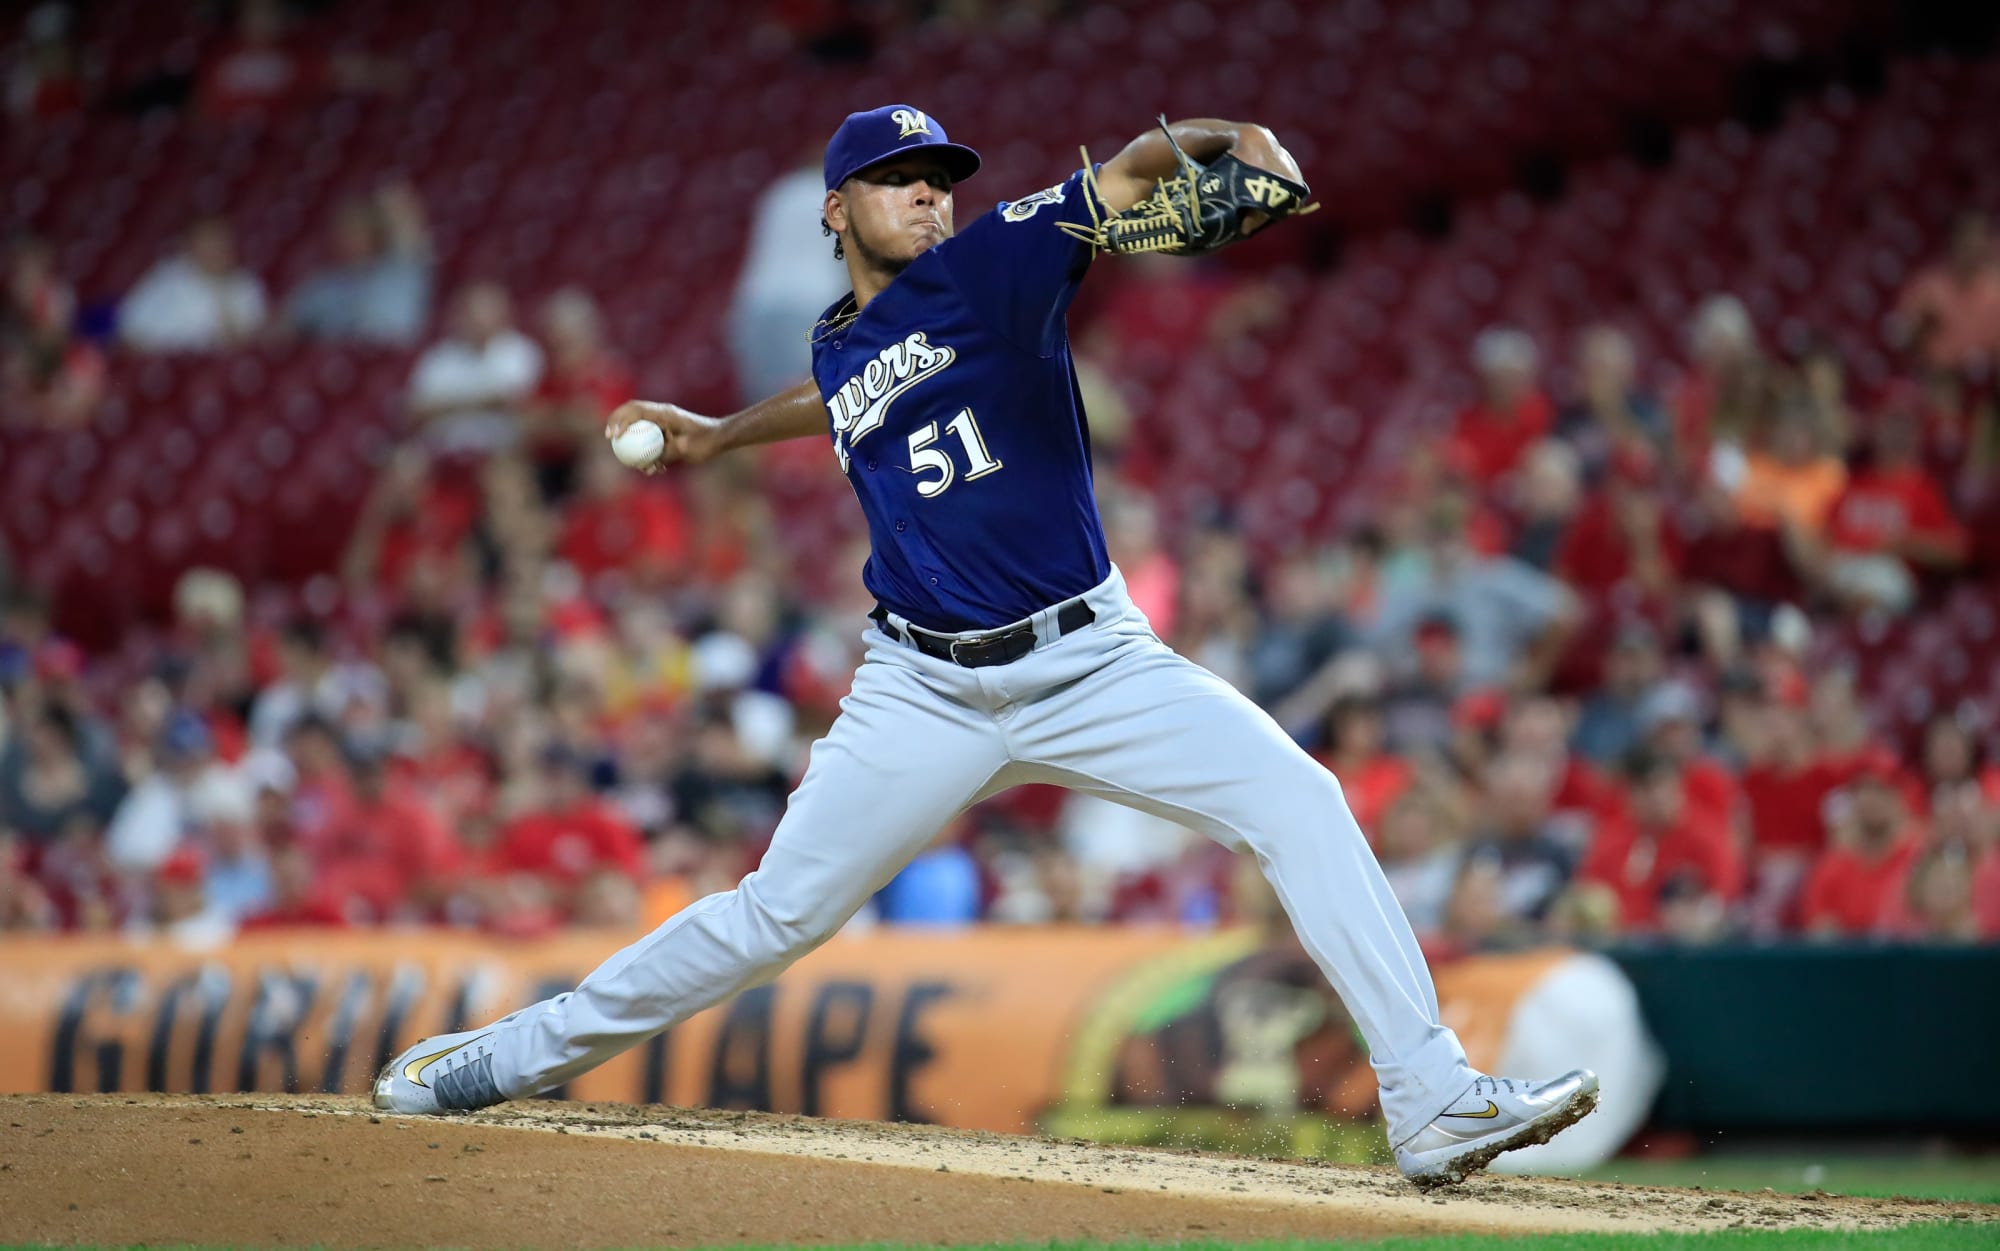 Milwaukee Brewers Who is their best rookie this year?